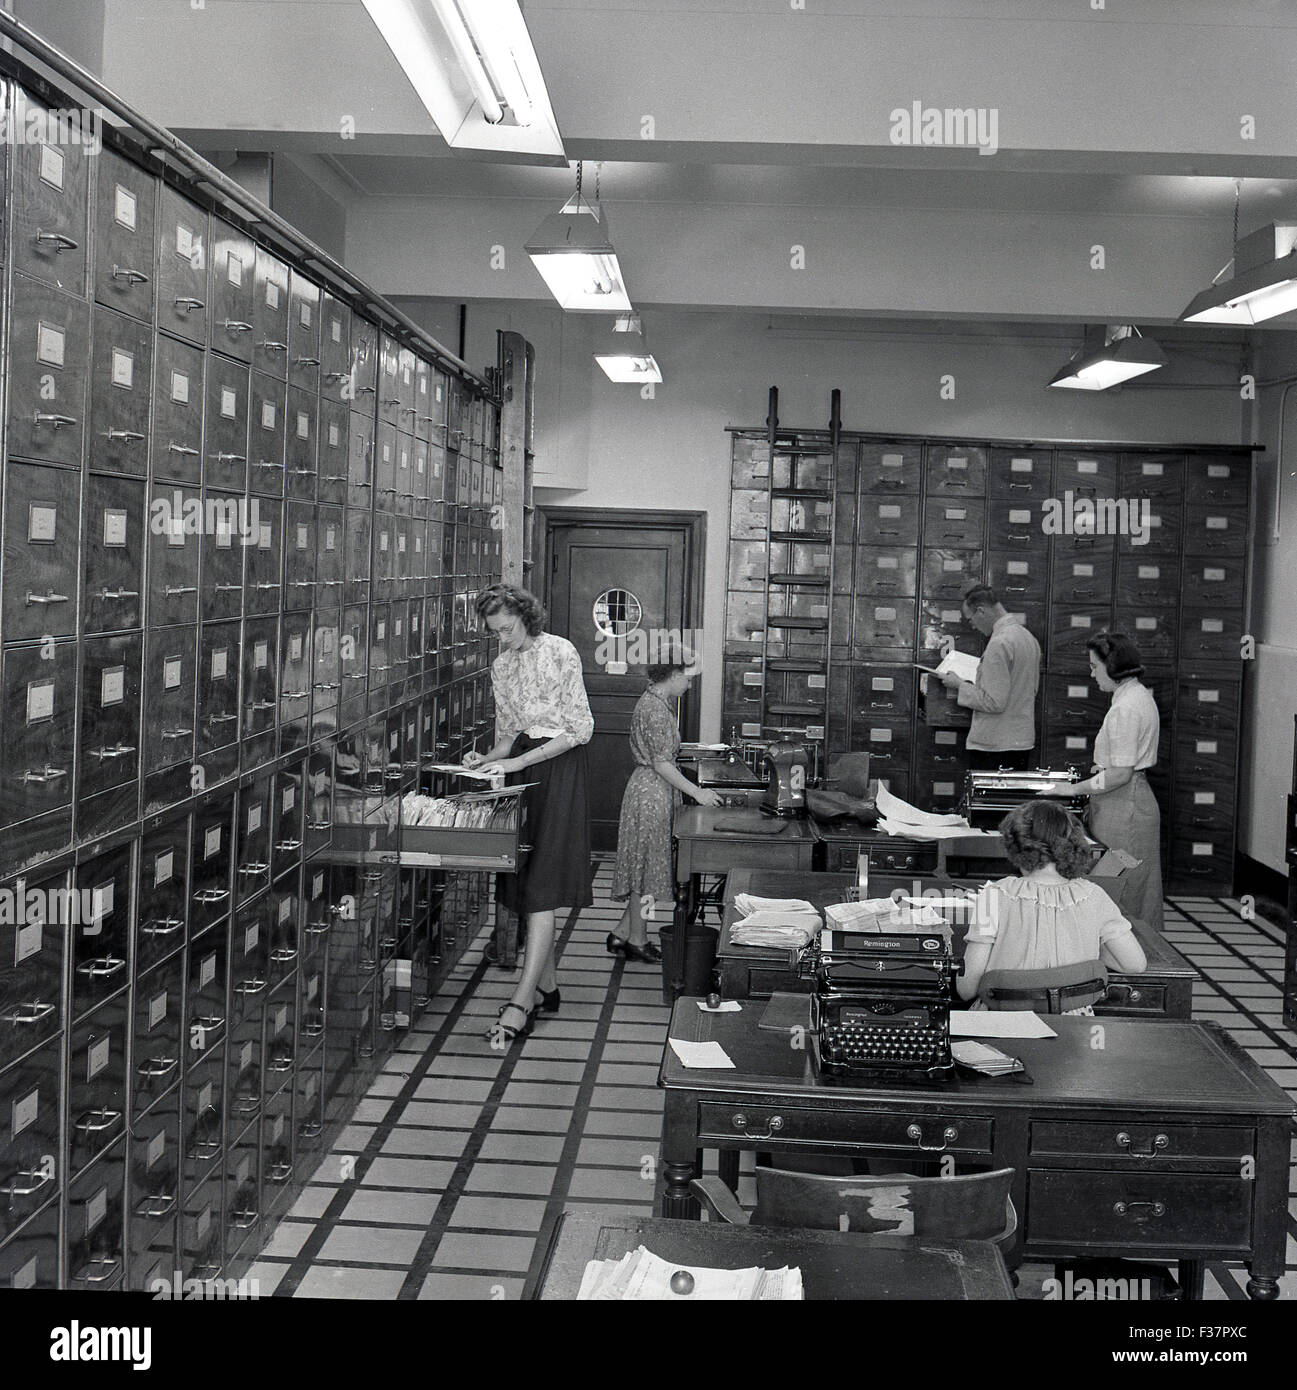 Historical, 1950s, female staff working in a large room filled with ceiling high shiny metal filing cabinets, several desks and typewriters. Stock Photo